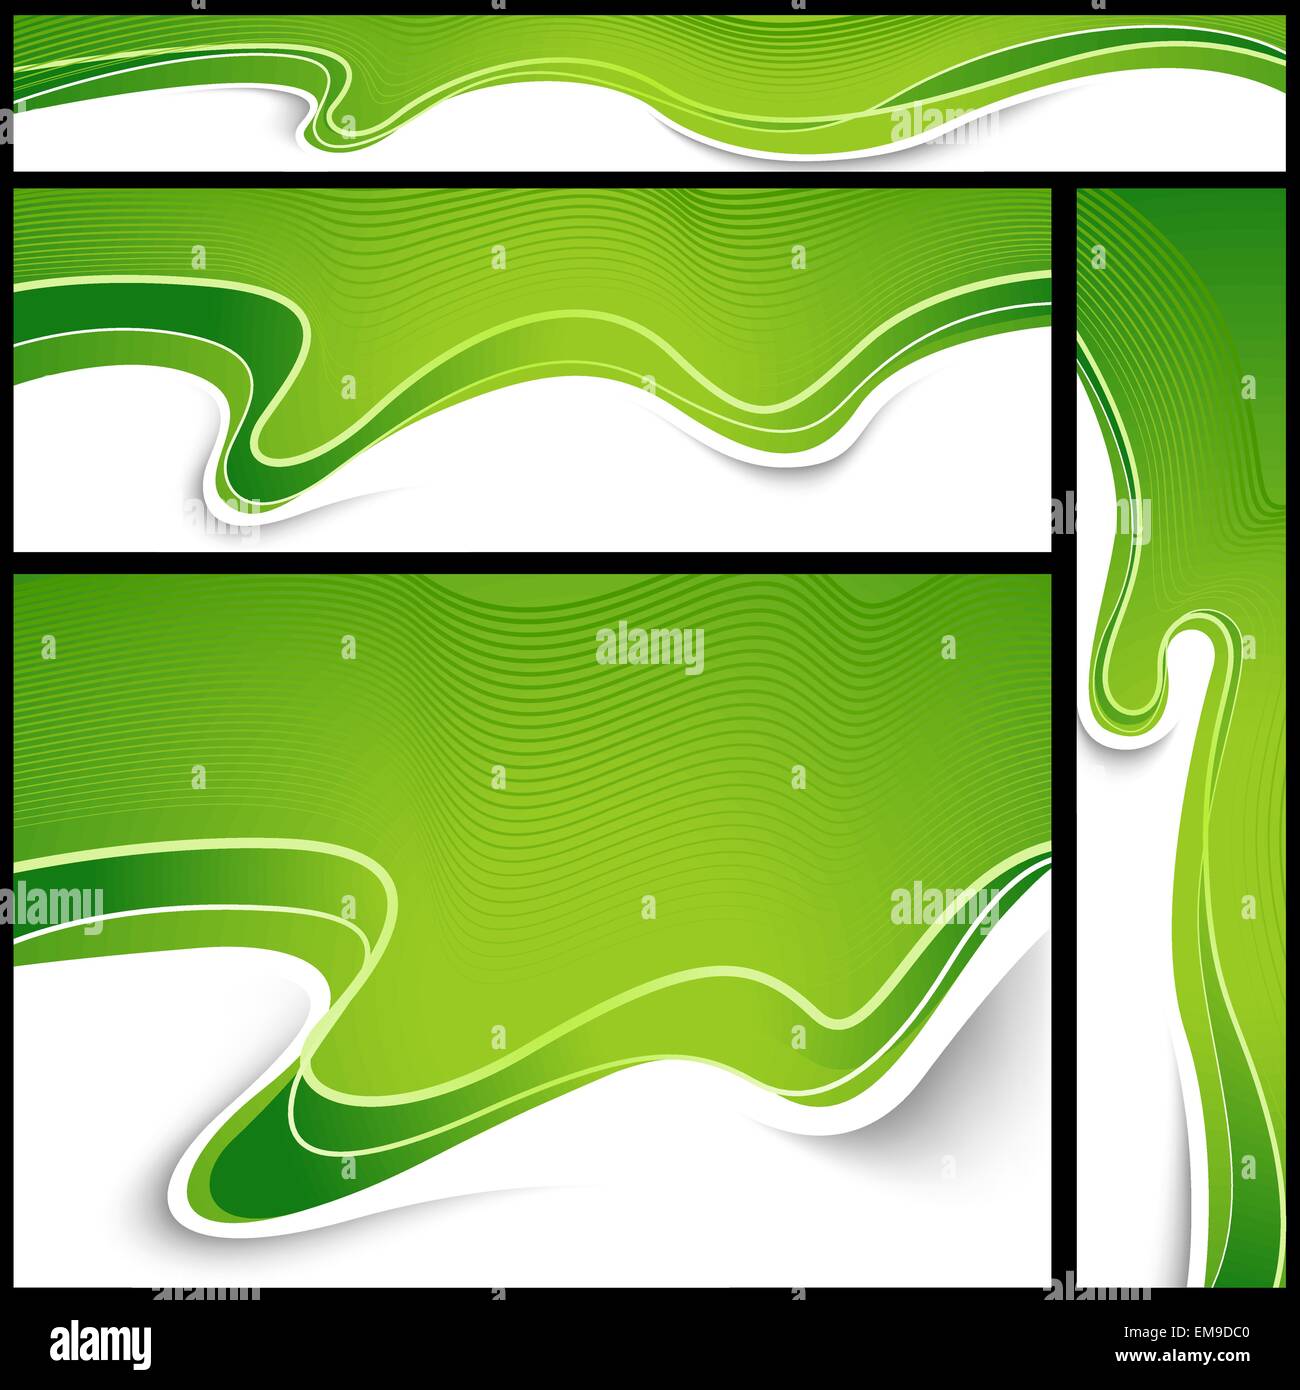 Abstract Backgrounds Stock Vector